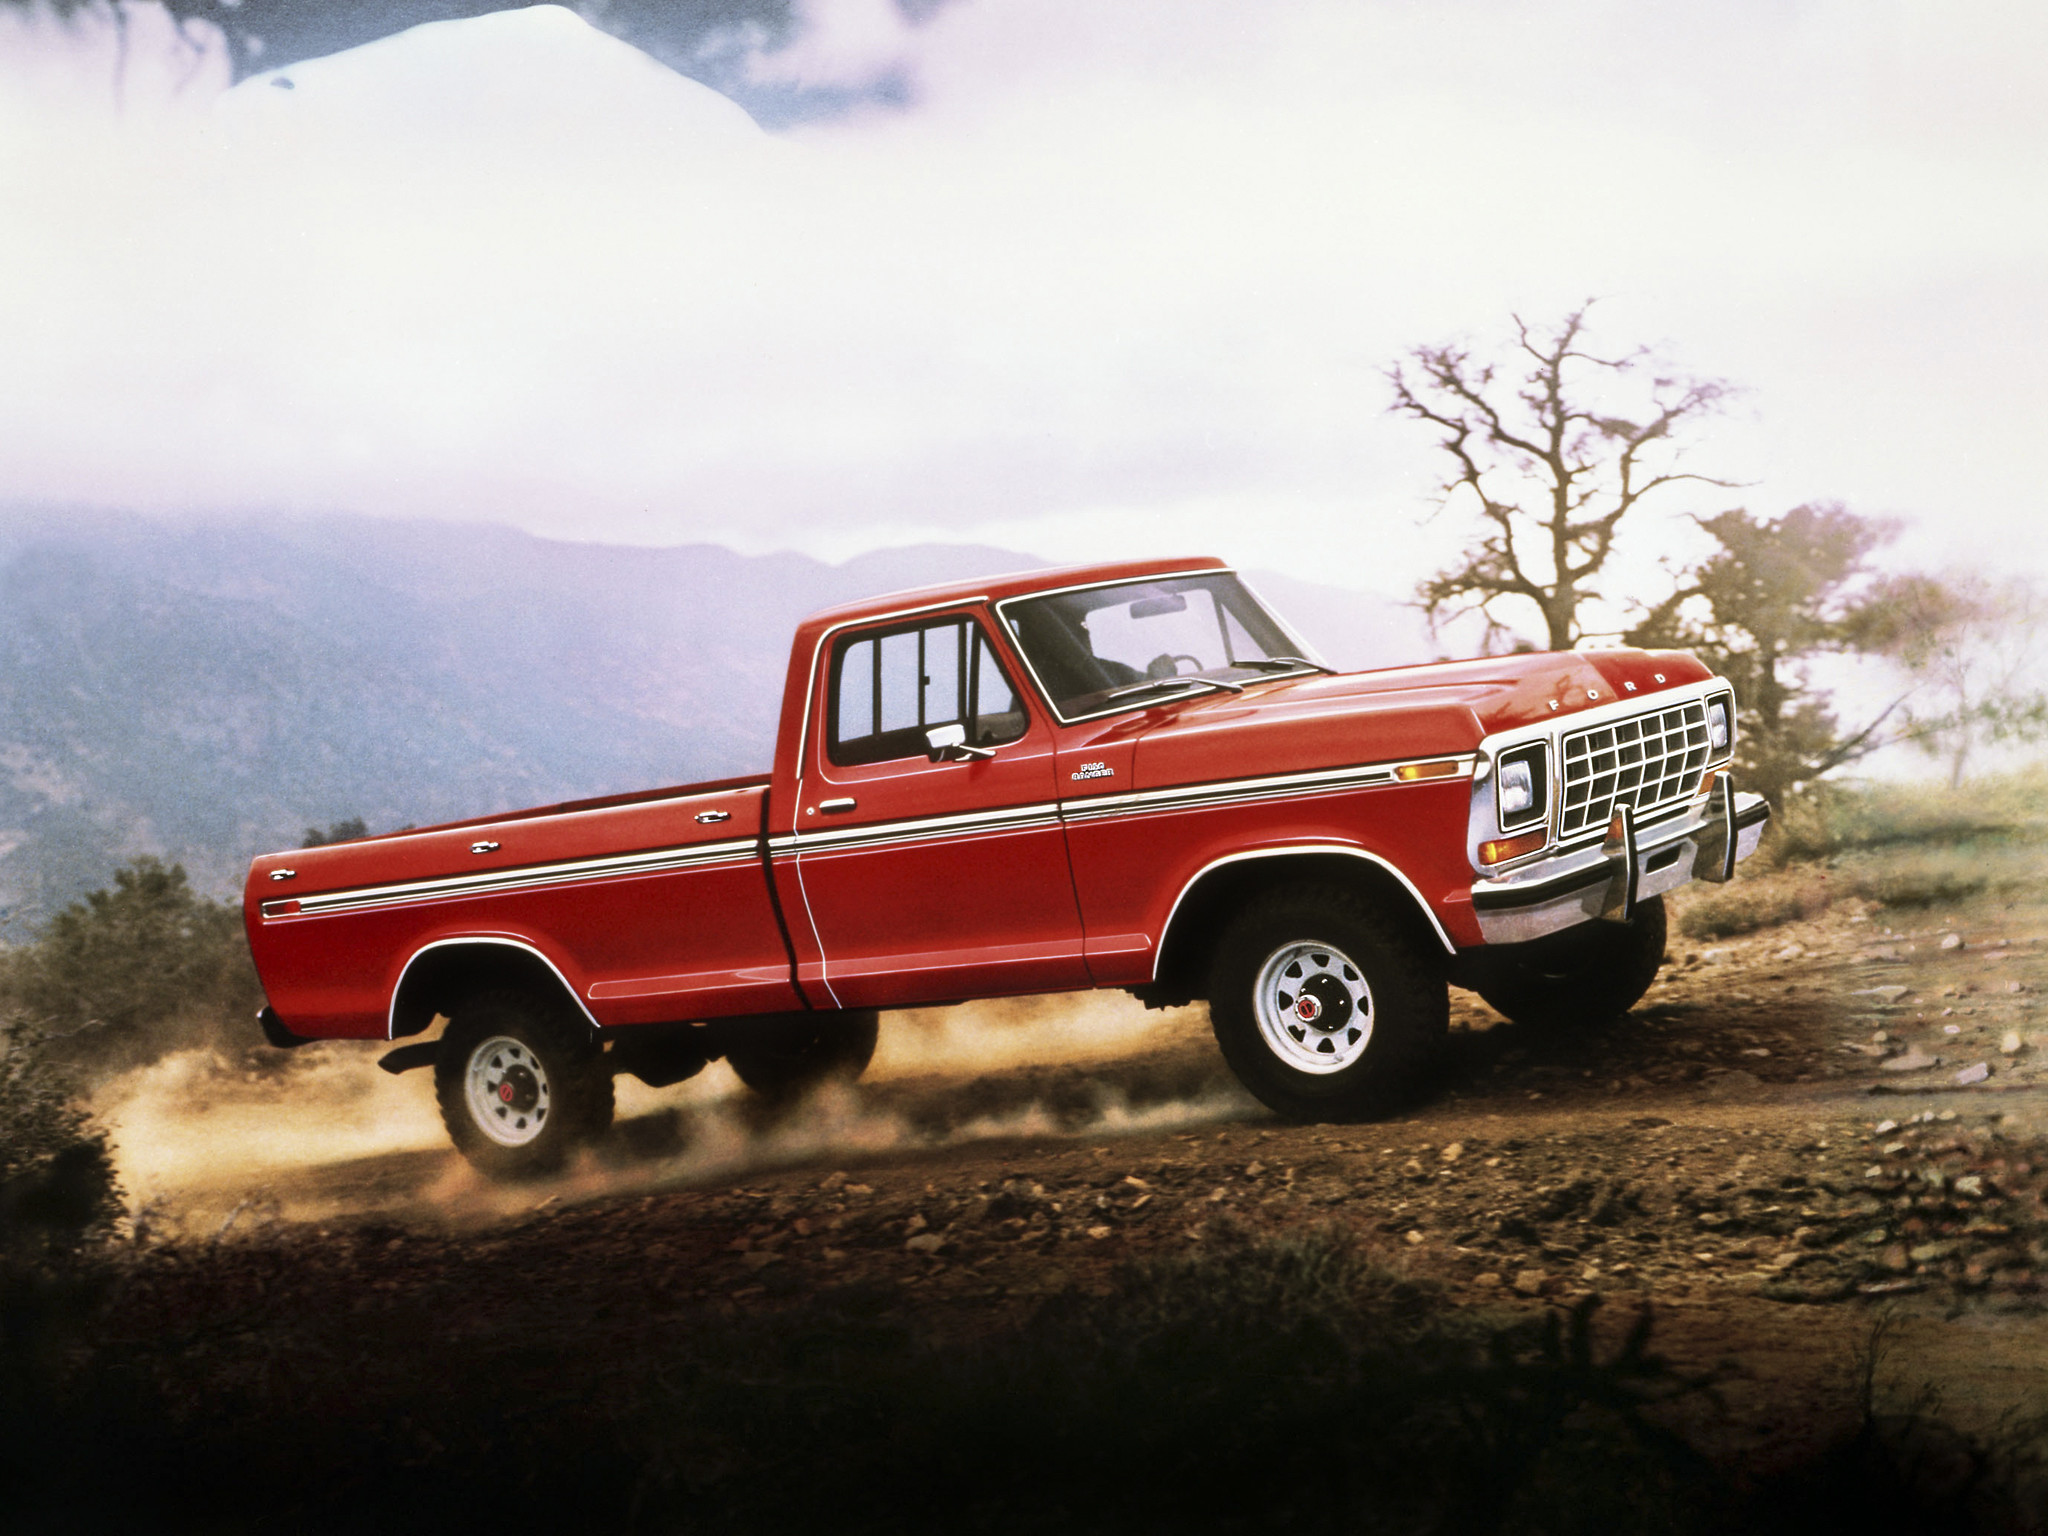 2048x1536 wallpaper.wiki-Ford-Truck-Pictures-PIC-WPC003989